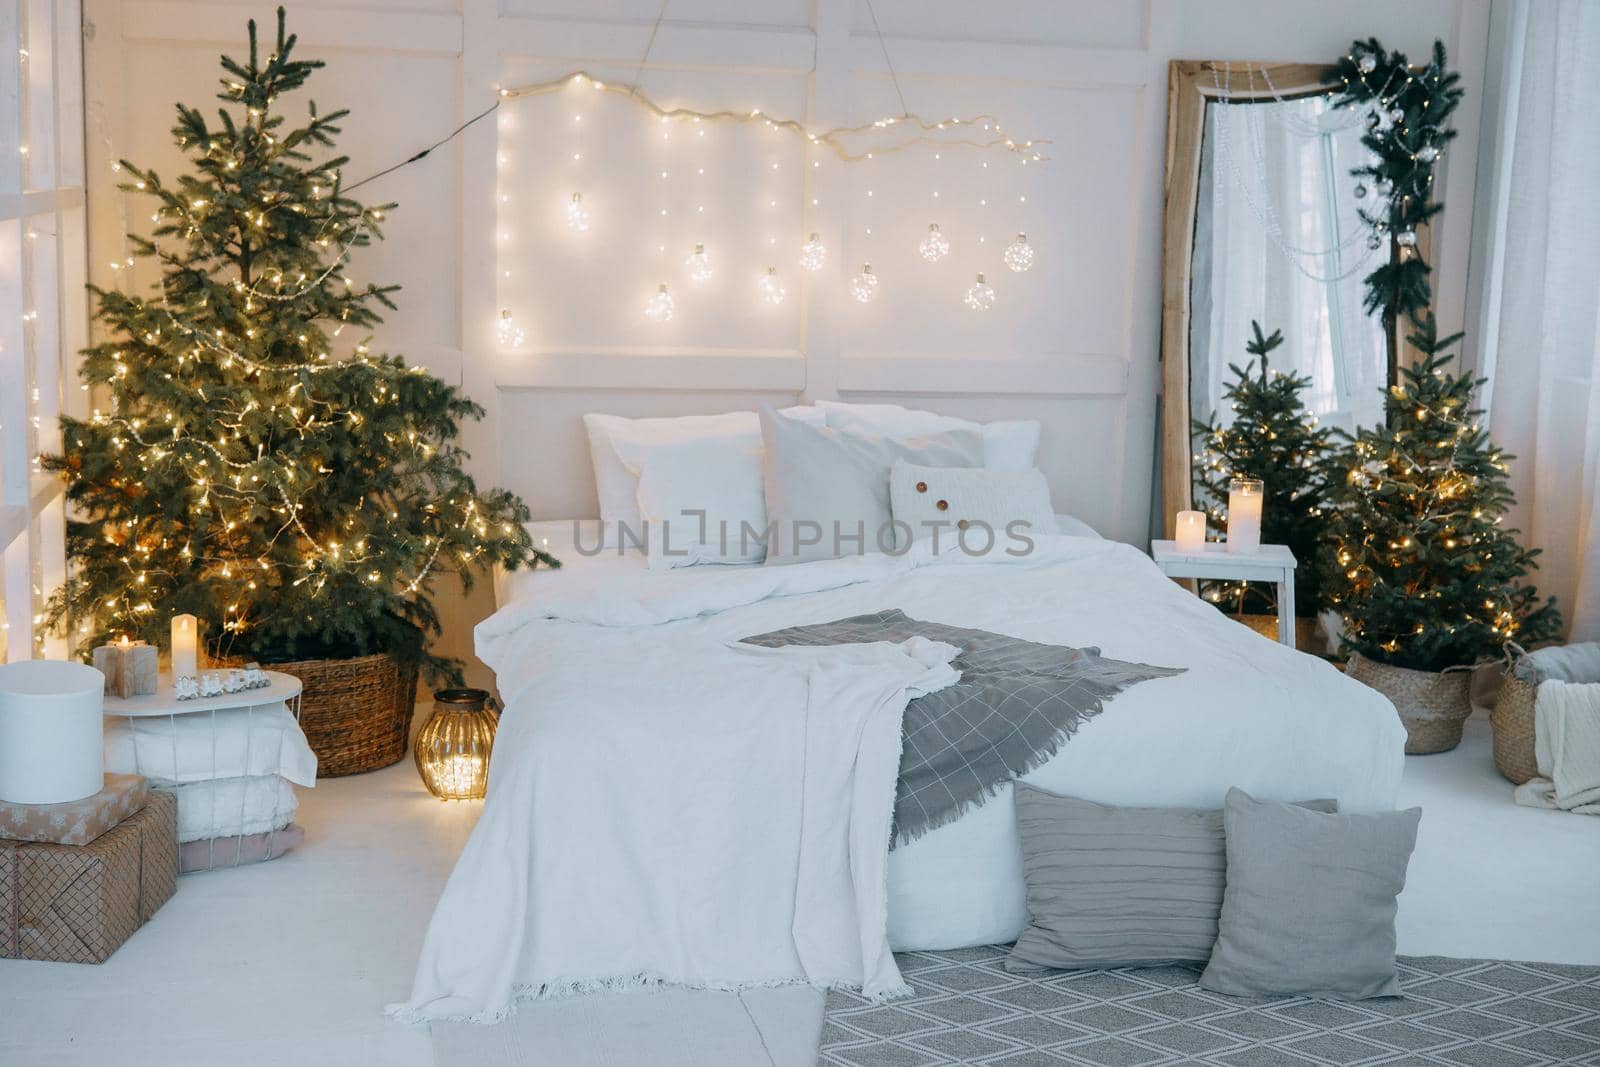 Tver, Russia-November 15, 2019. Embellished mirror, a large bed and a living Christmas tree with lights. New year's interior in bright colors, festive atmosphere, decor, garlands, gifts.